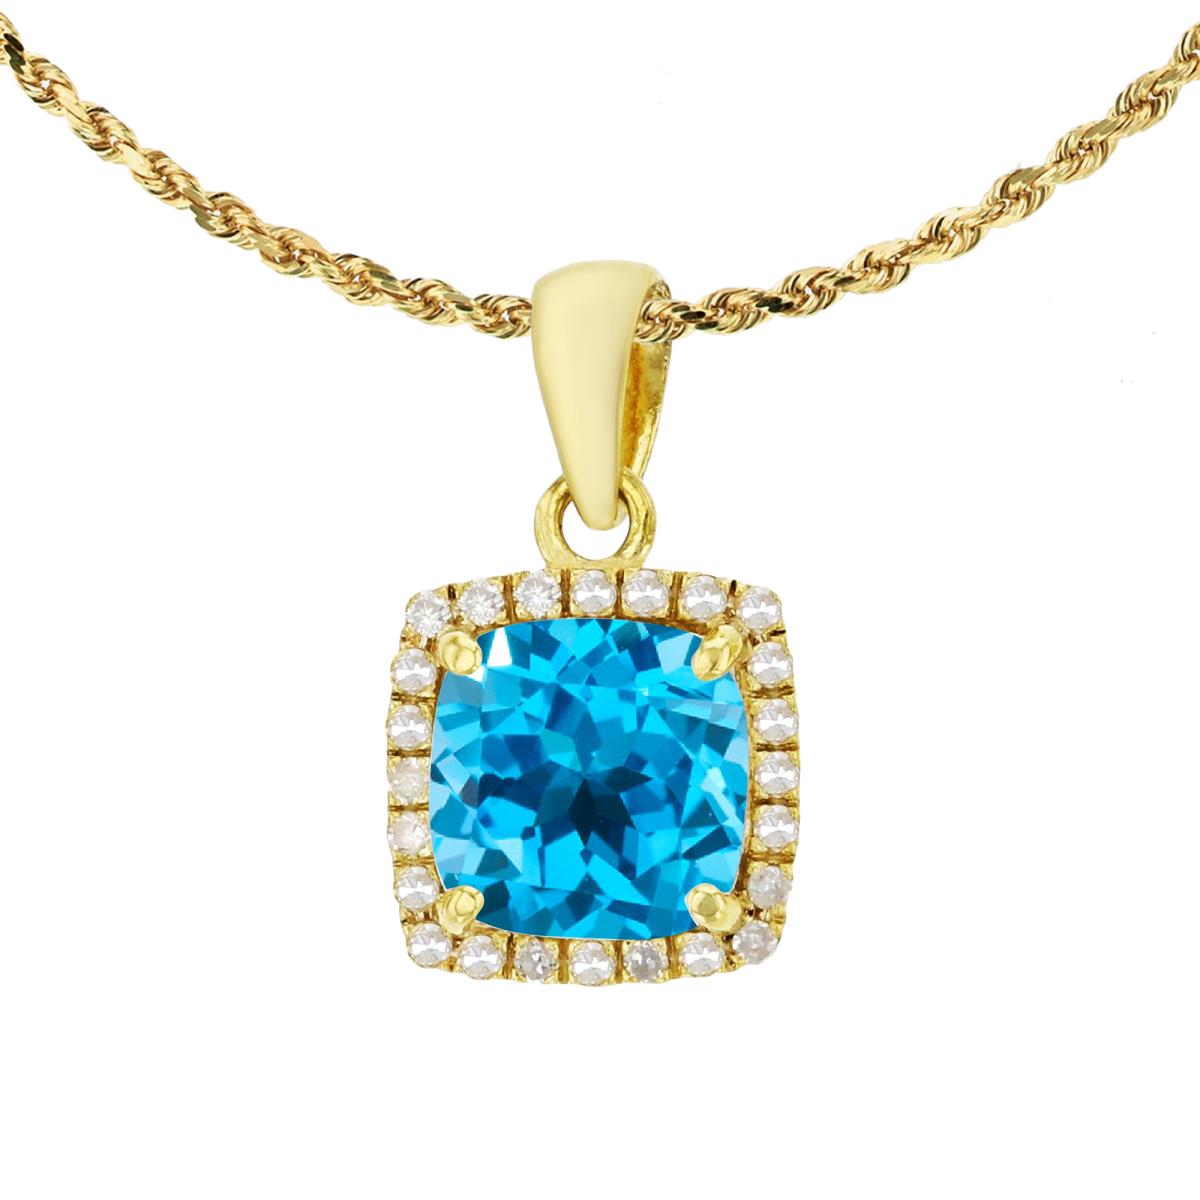 10K Yellow Gold 7mm Cushion Swiss Blue Topaz & 0.12 CTTW Diamond Halo 18" Rope Chain Necklace